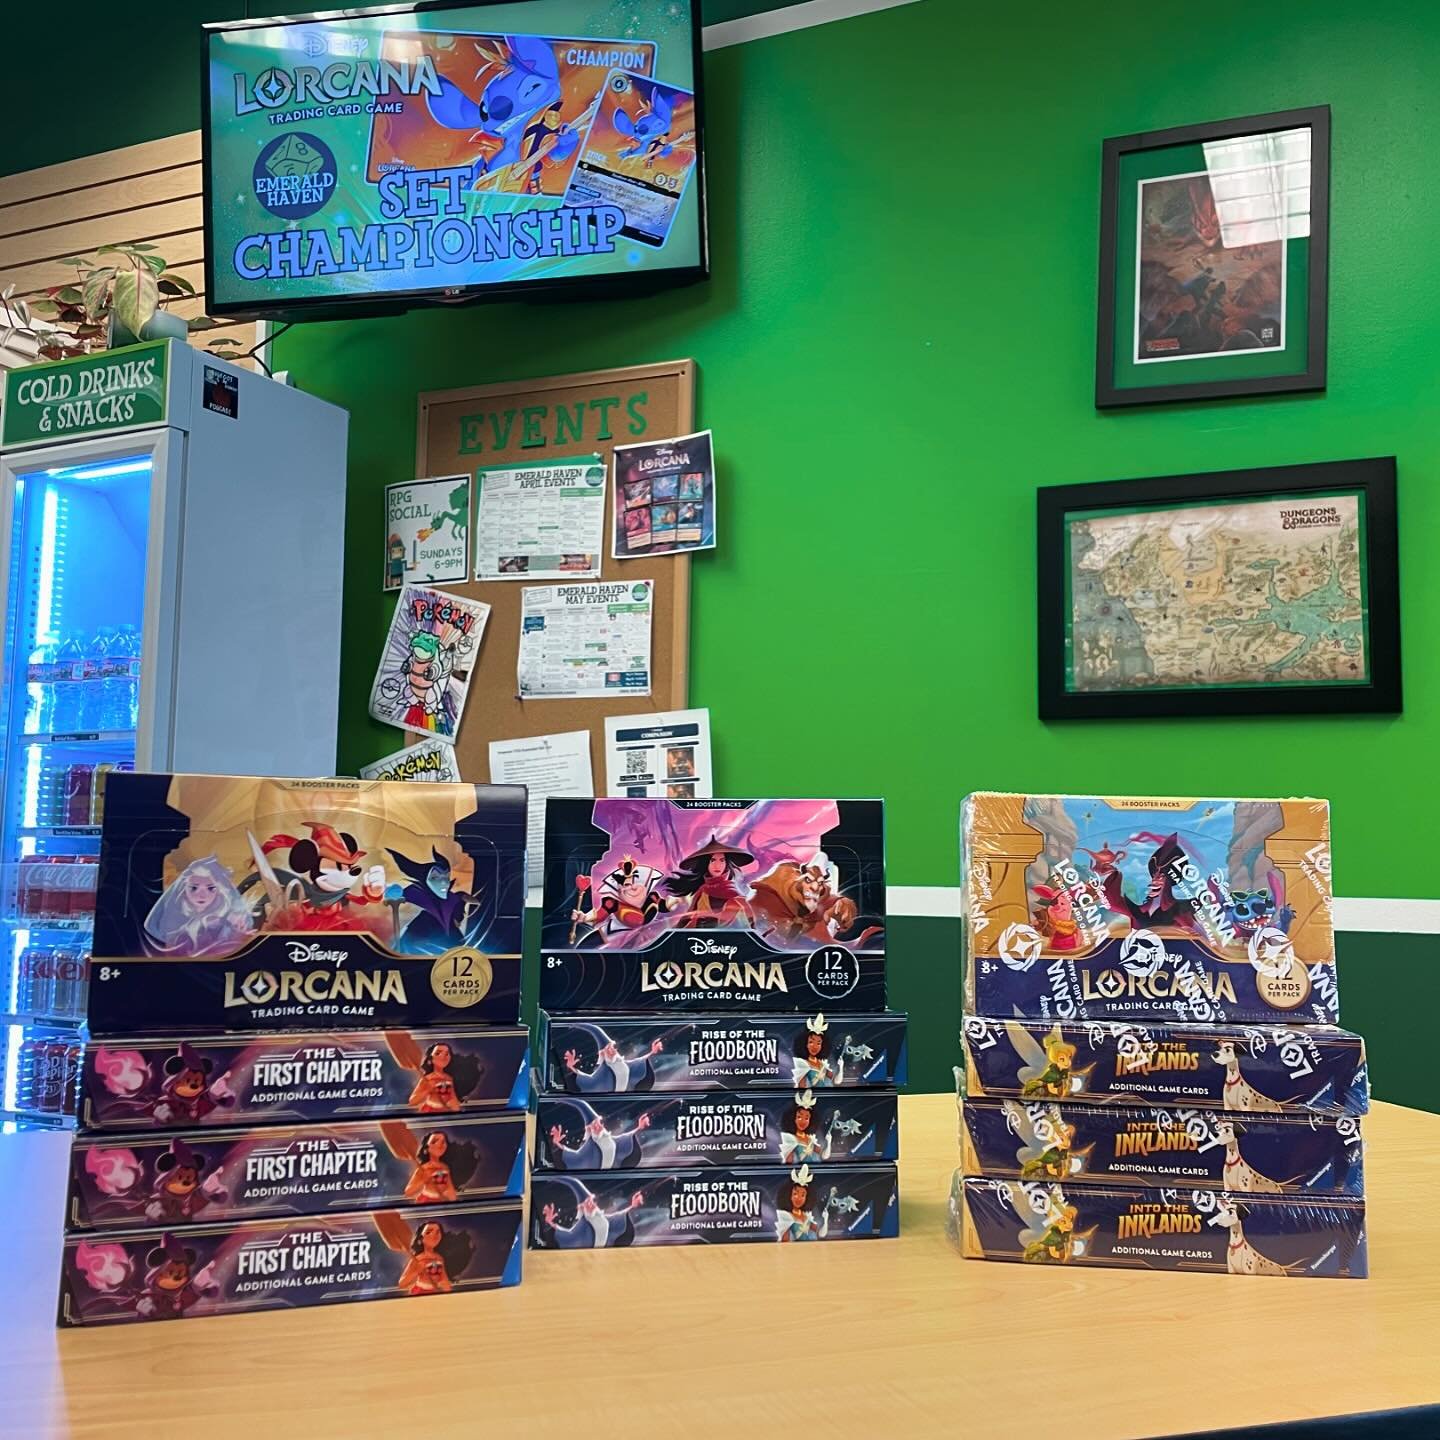 It&rsquo;s a magical day! Our Lorcana Set Championship has begun, and we still have booster packs and boxes available. Good luck to all our players eyeing those enchanted Stitch cards and playmats!